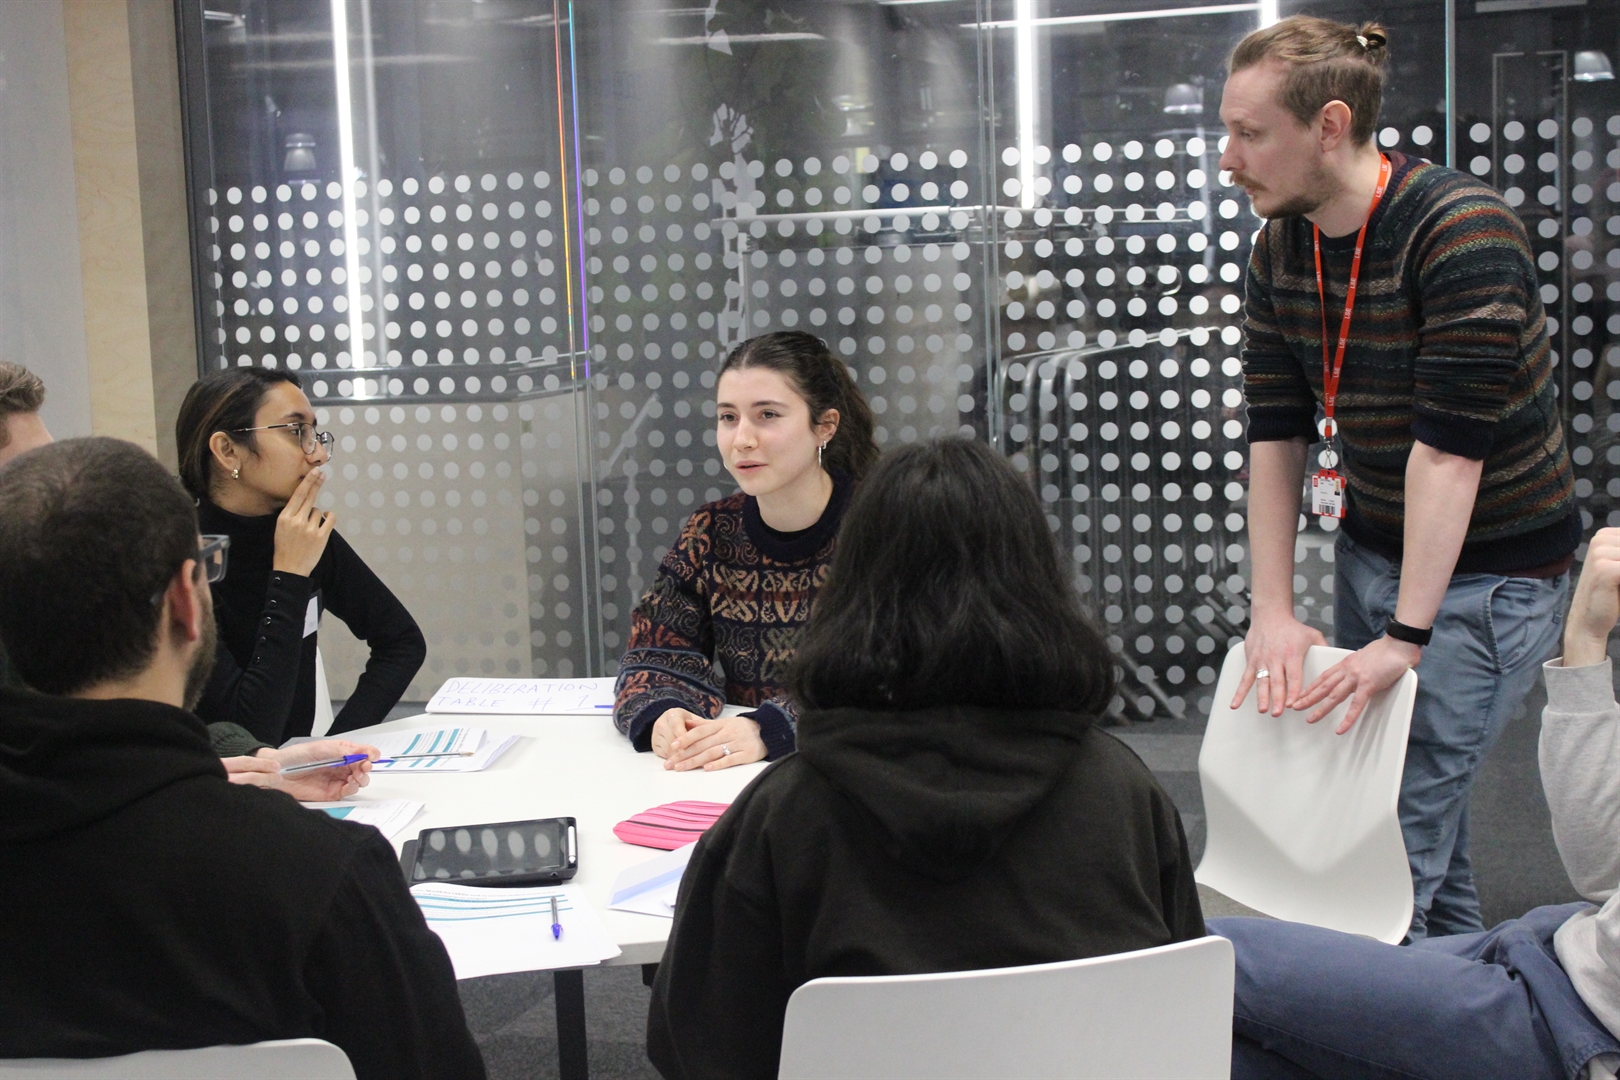 The first Student Panel run by LSESU, hosted on the 17th and 18th of January 2023.